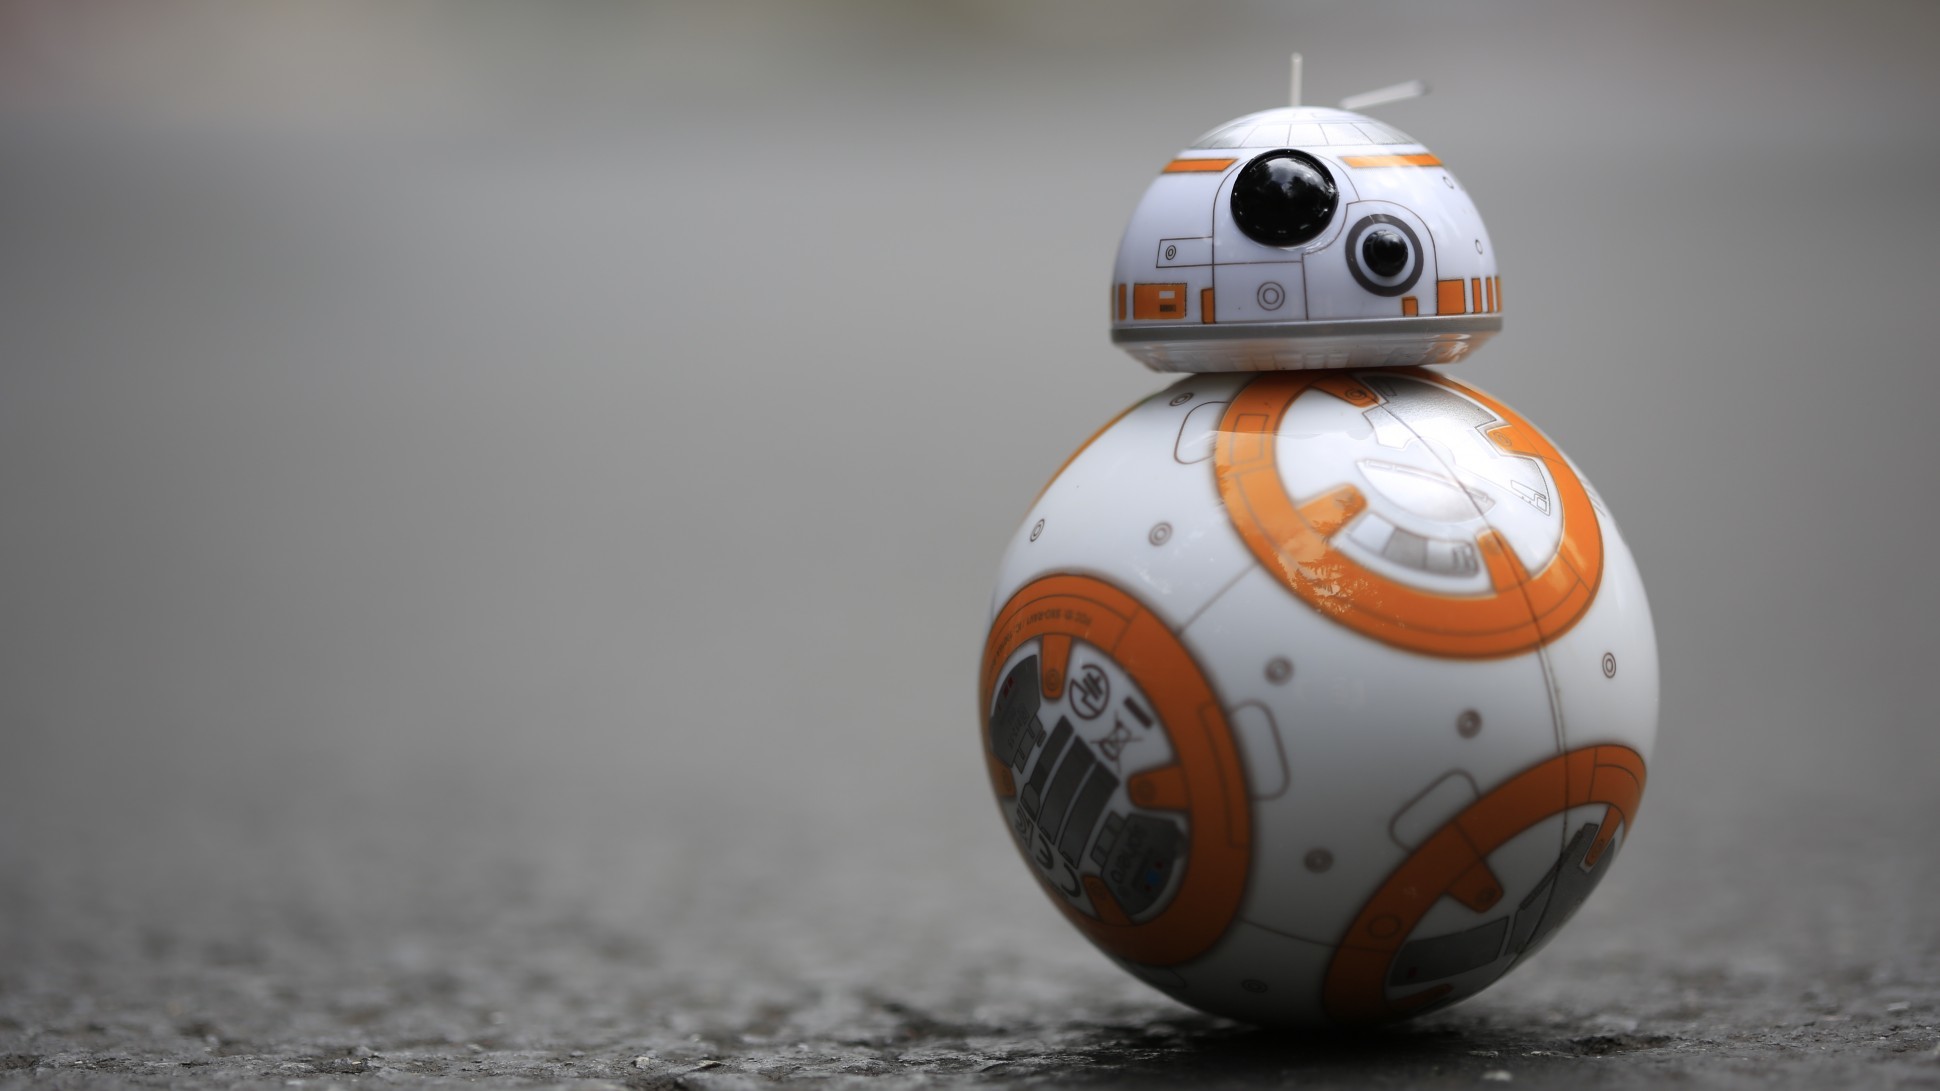 1940x1091 Star Wars BB 8 Droid Wallpapers - HD Wallpapers Backgrounds of Your .